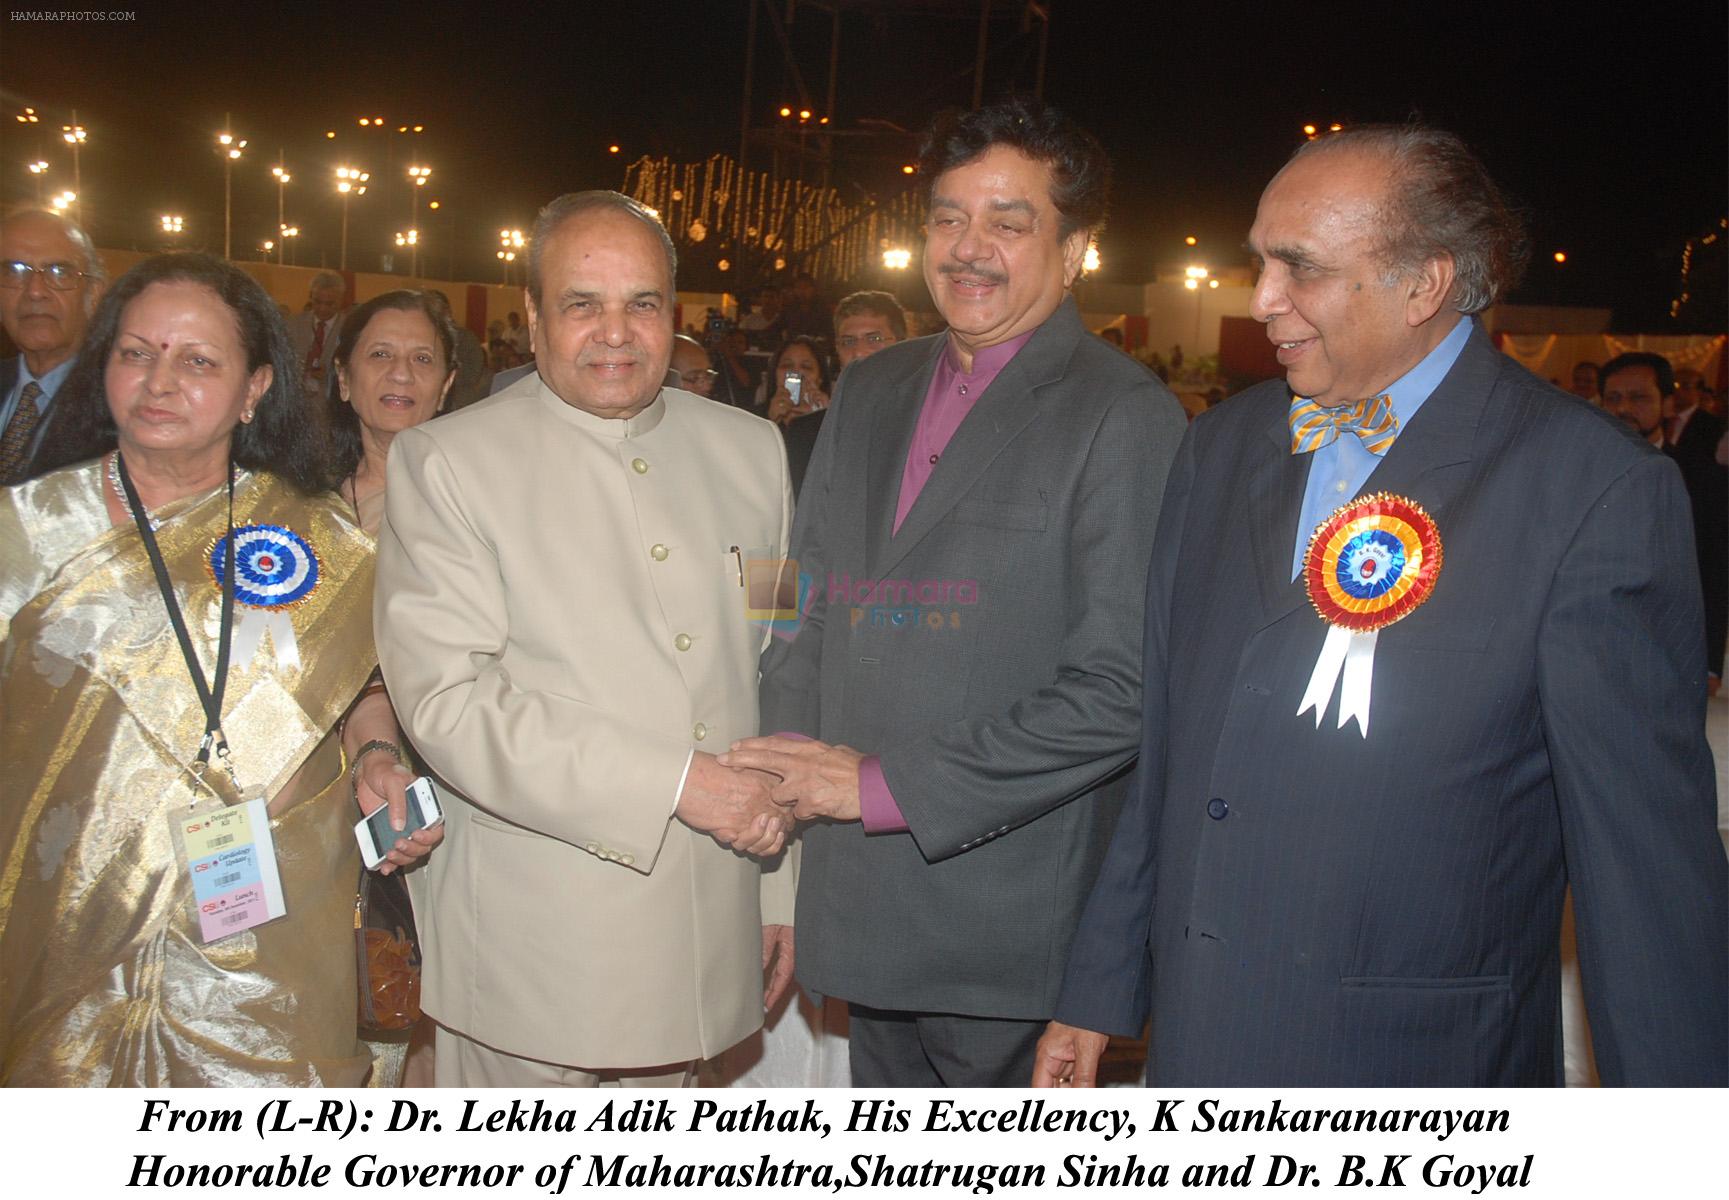 Shatrughan Sinha at the 63rd Annual Conference of Cardiological Society of India in NCPA complex, Mumbai on 9th Dec 2011